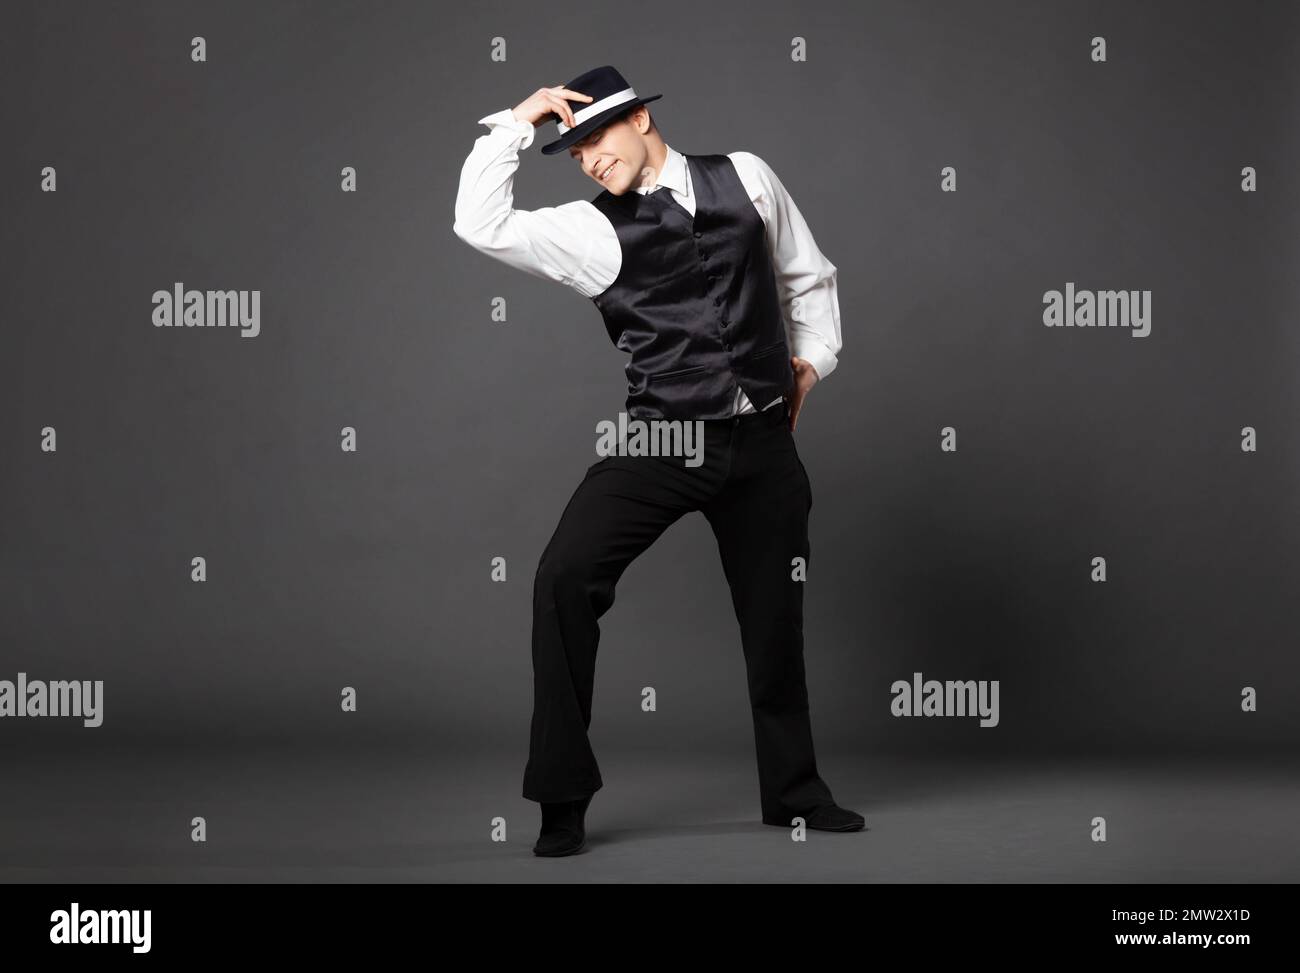 Men's Beauty, Fashion. Retro Style. Handsome Man In An Expensive  Three-piece Suit, A Cap And Leather Gloves On A Black Background. Mafia  Man. Stock Photo, Picture and Royalty Free Image. Image 158258662.